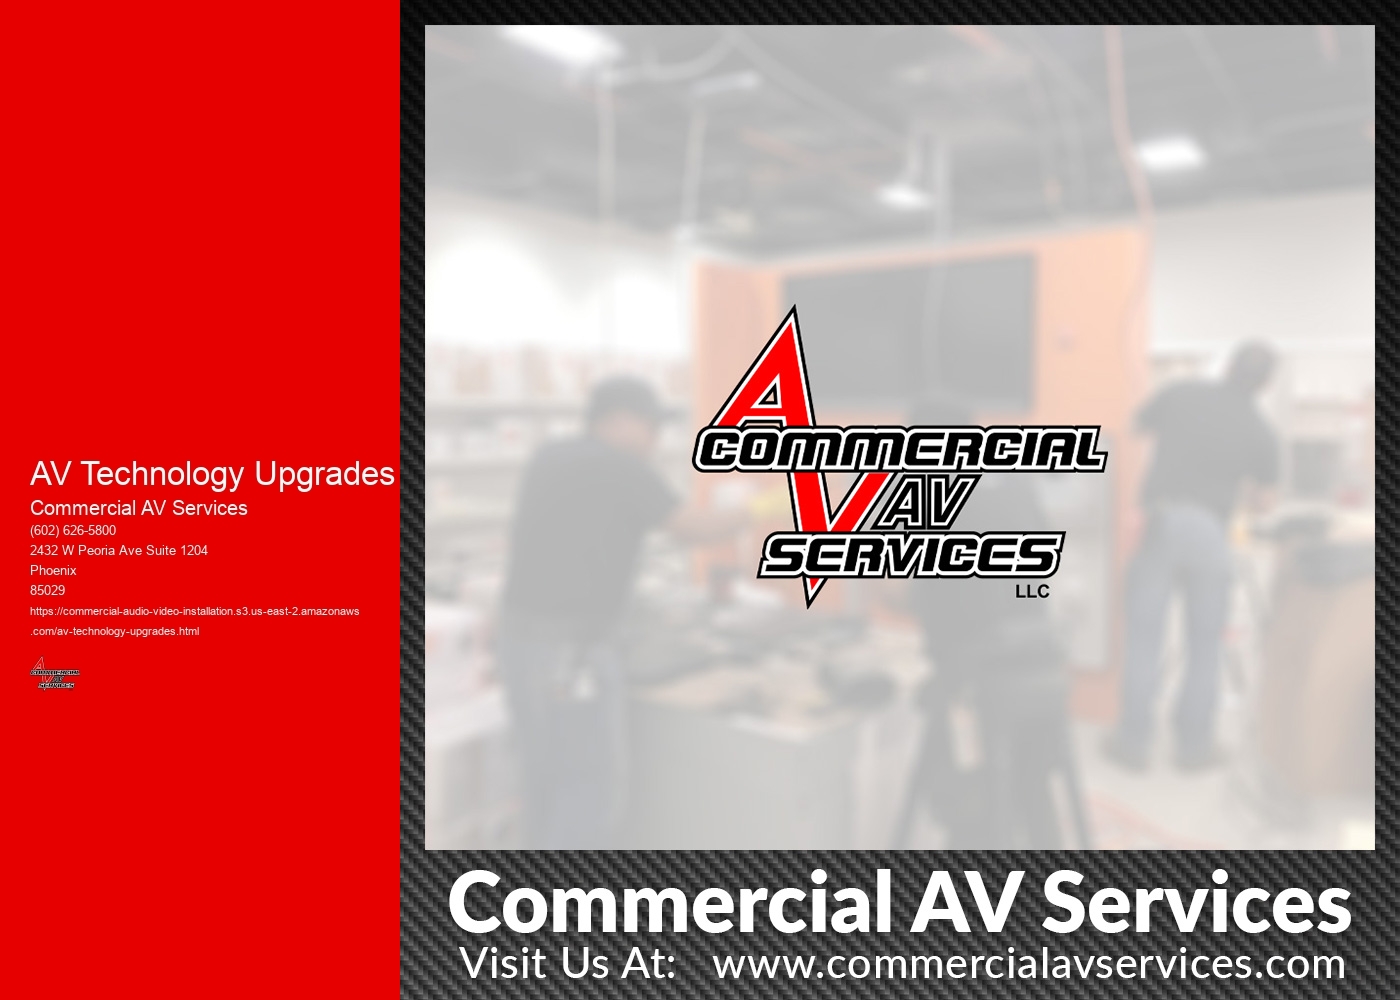 What are the considerations when upgrading AV technology in a large event venue?